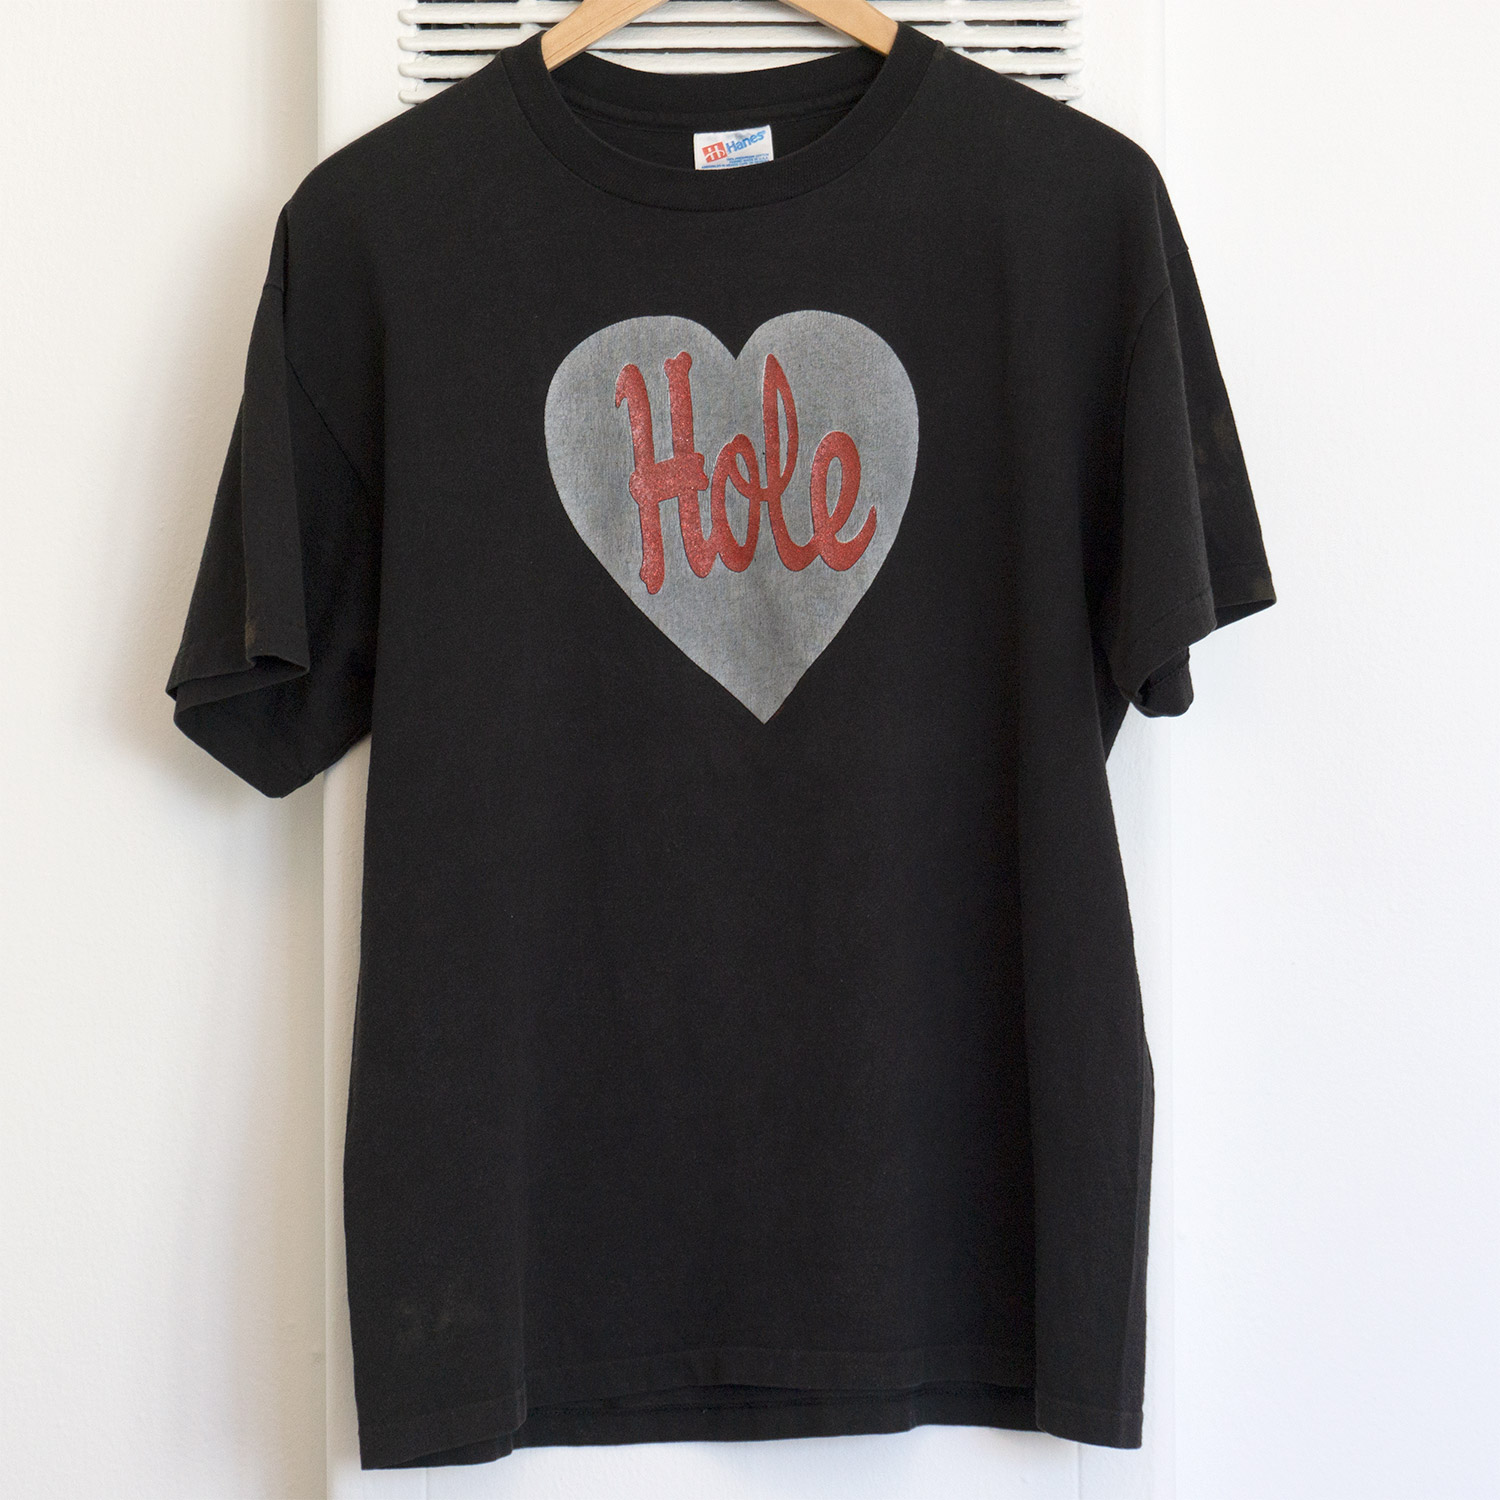 Vintage Hole the Band Silver Heart T-shirt with Hanes Tag, Front